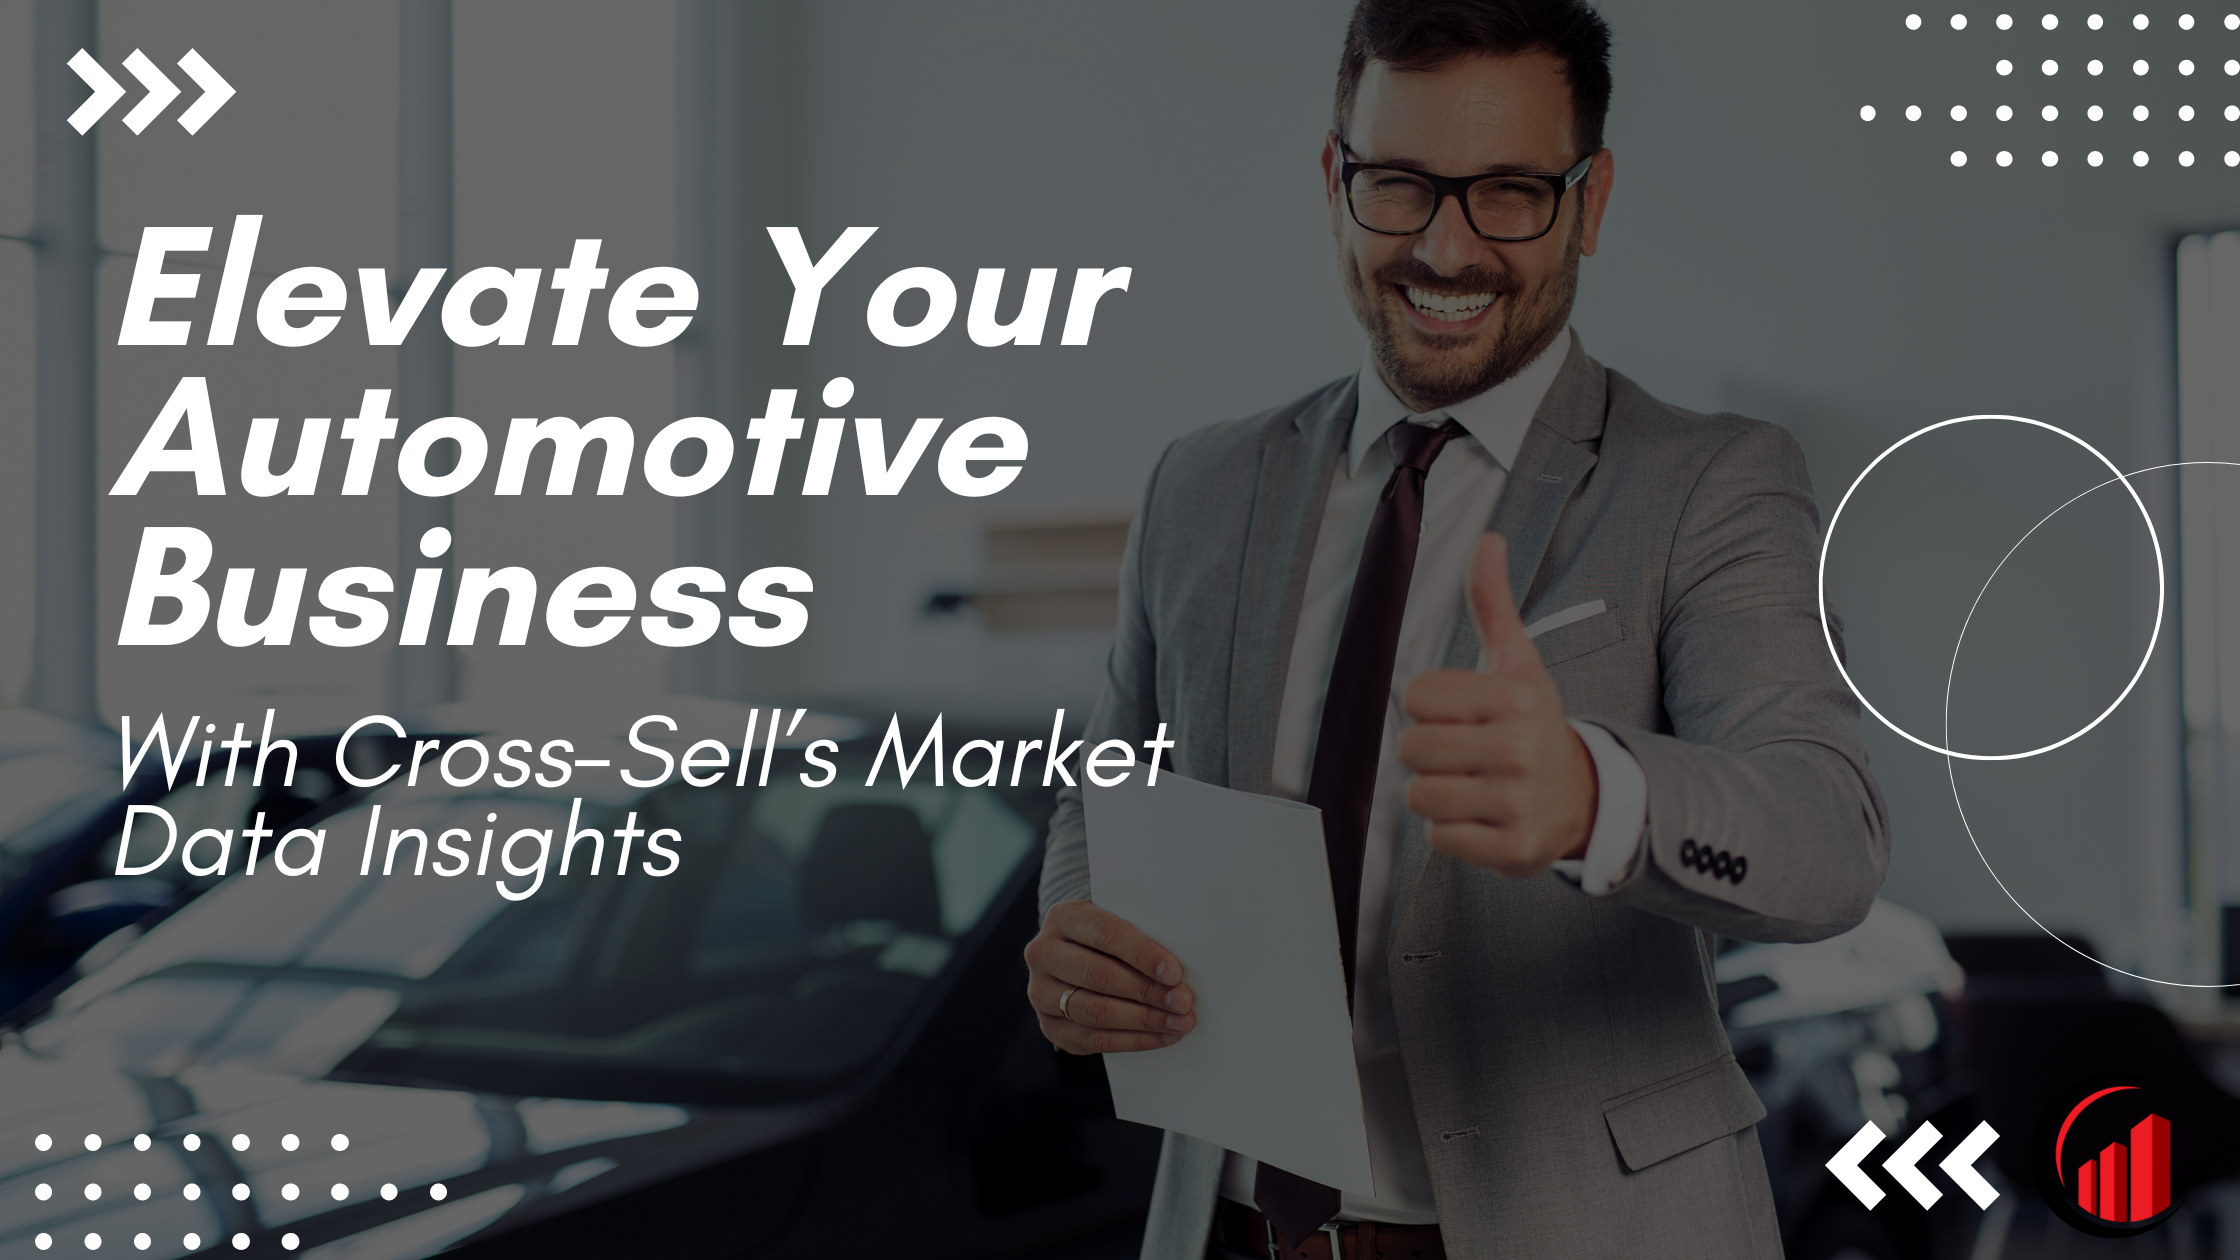 Elevate Your Automotive Business with Cross-Sell's Market Data Insights